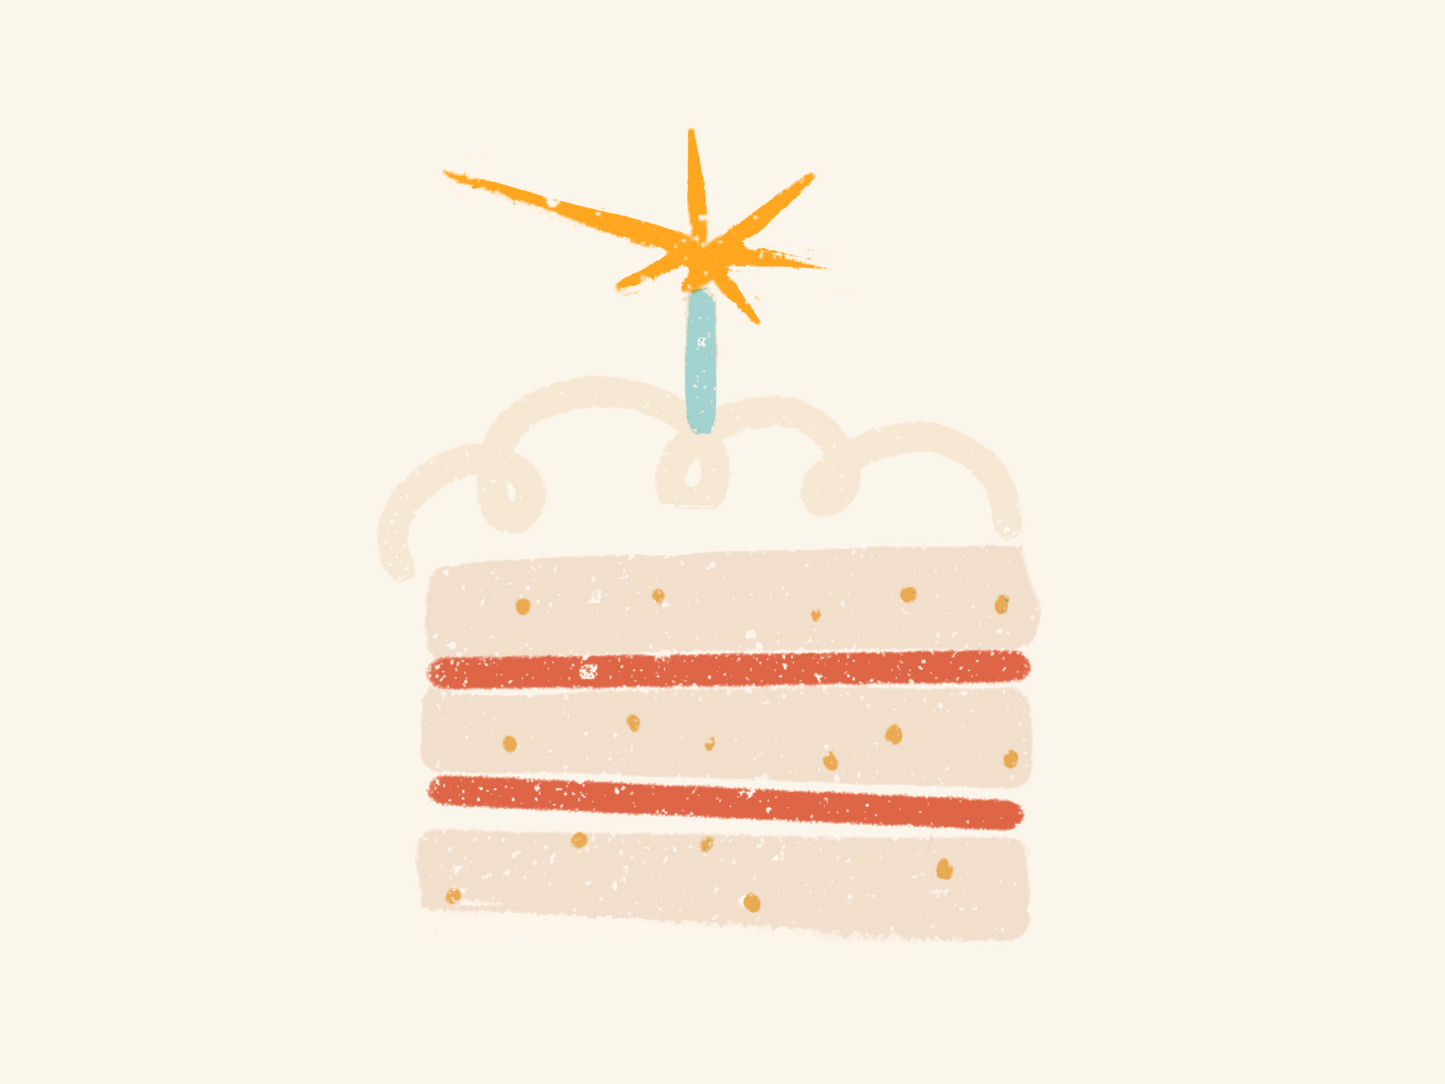 Build your cake